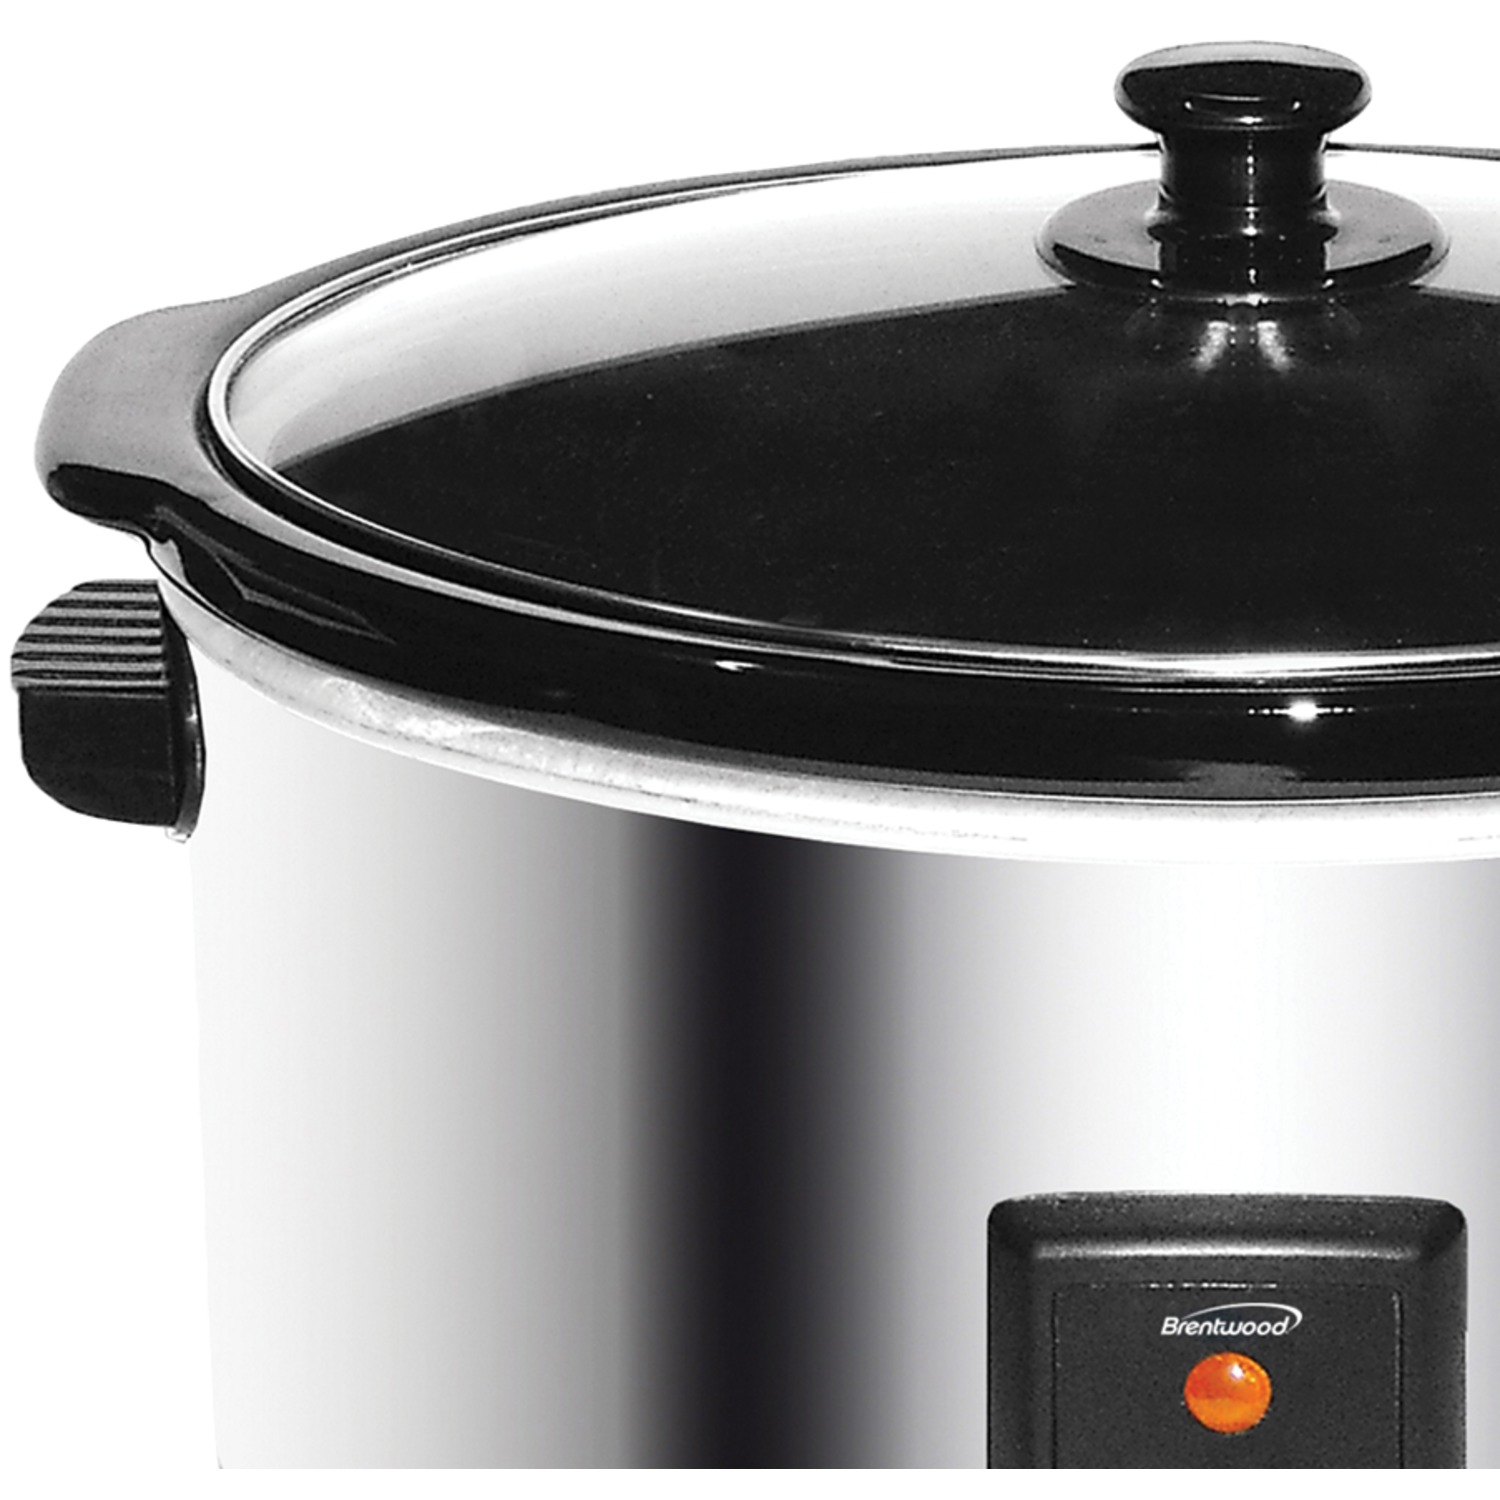 Brentwood SC-170S 8 Qt Slow Cooker Stainless Steel - image 4 of 8